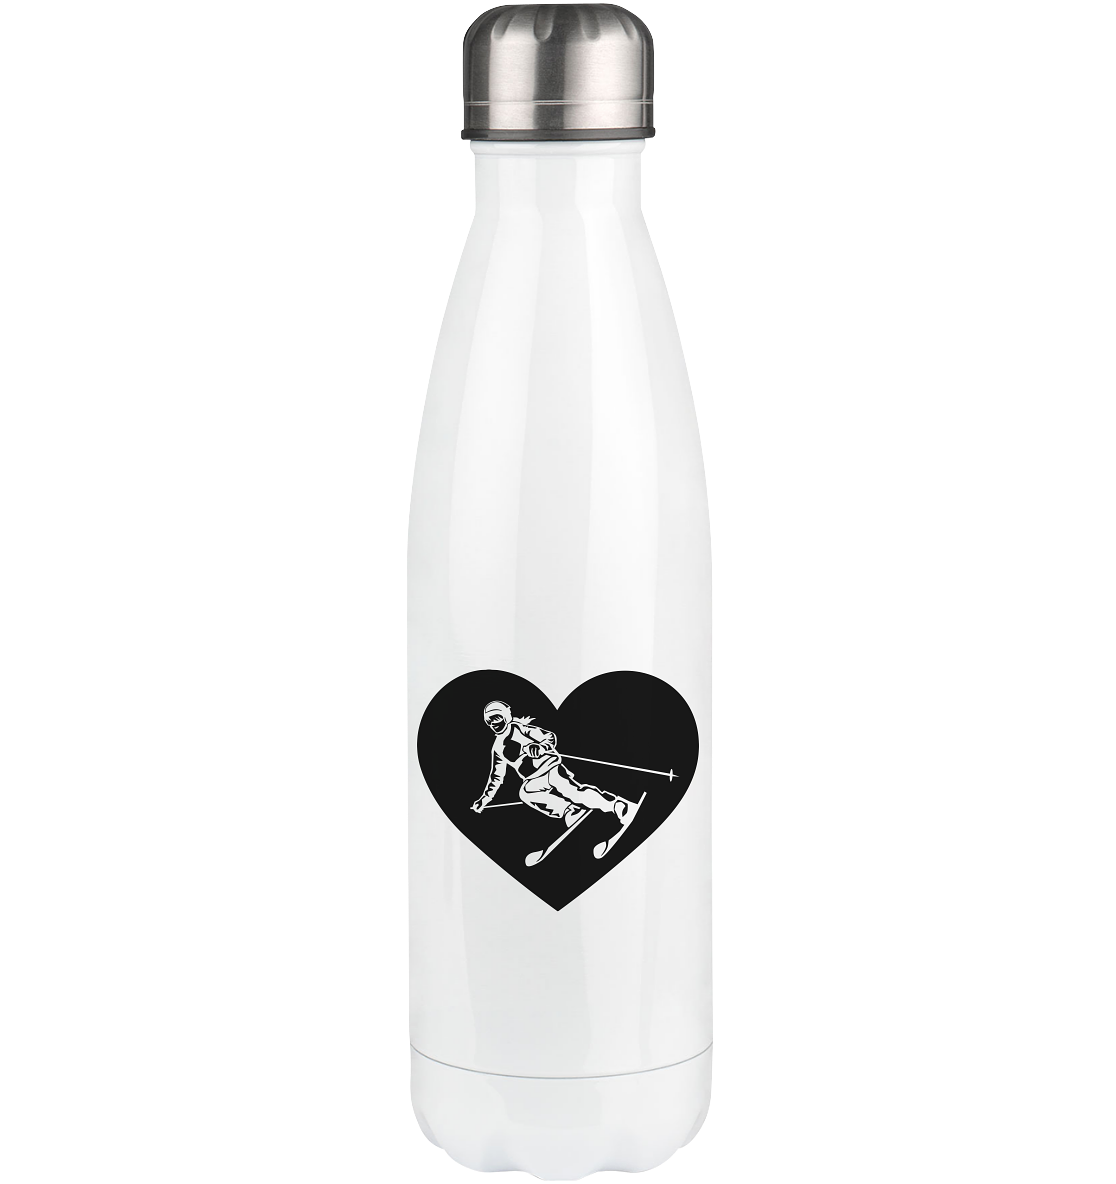 Heart 1 and Skiing - Edelstahl Thermosflasche klettern ski 500ml